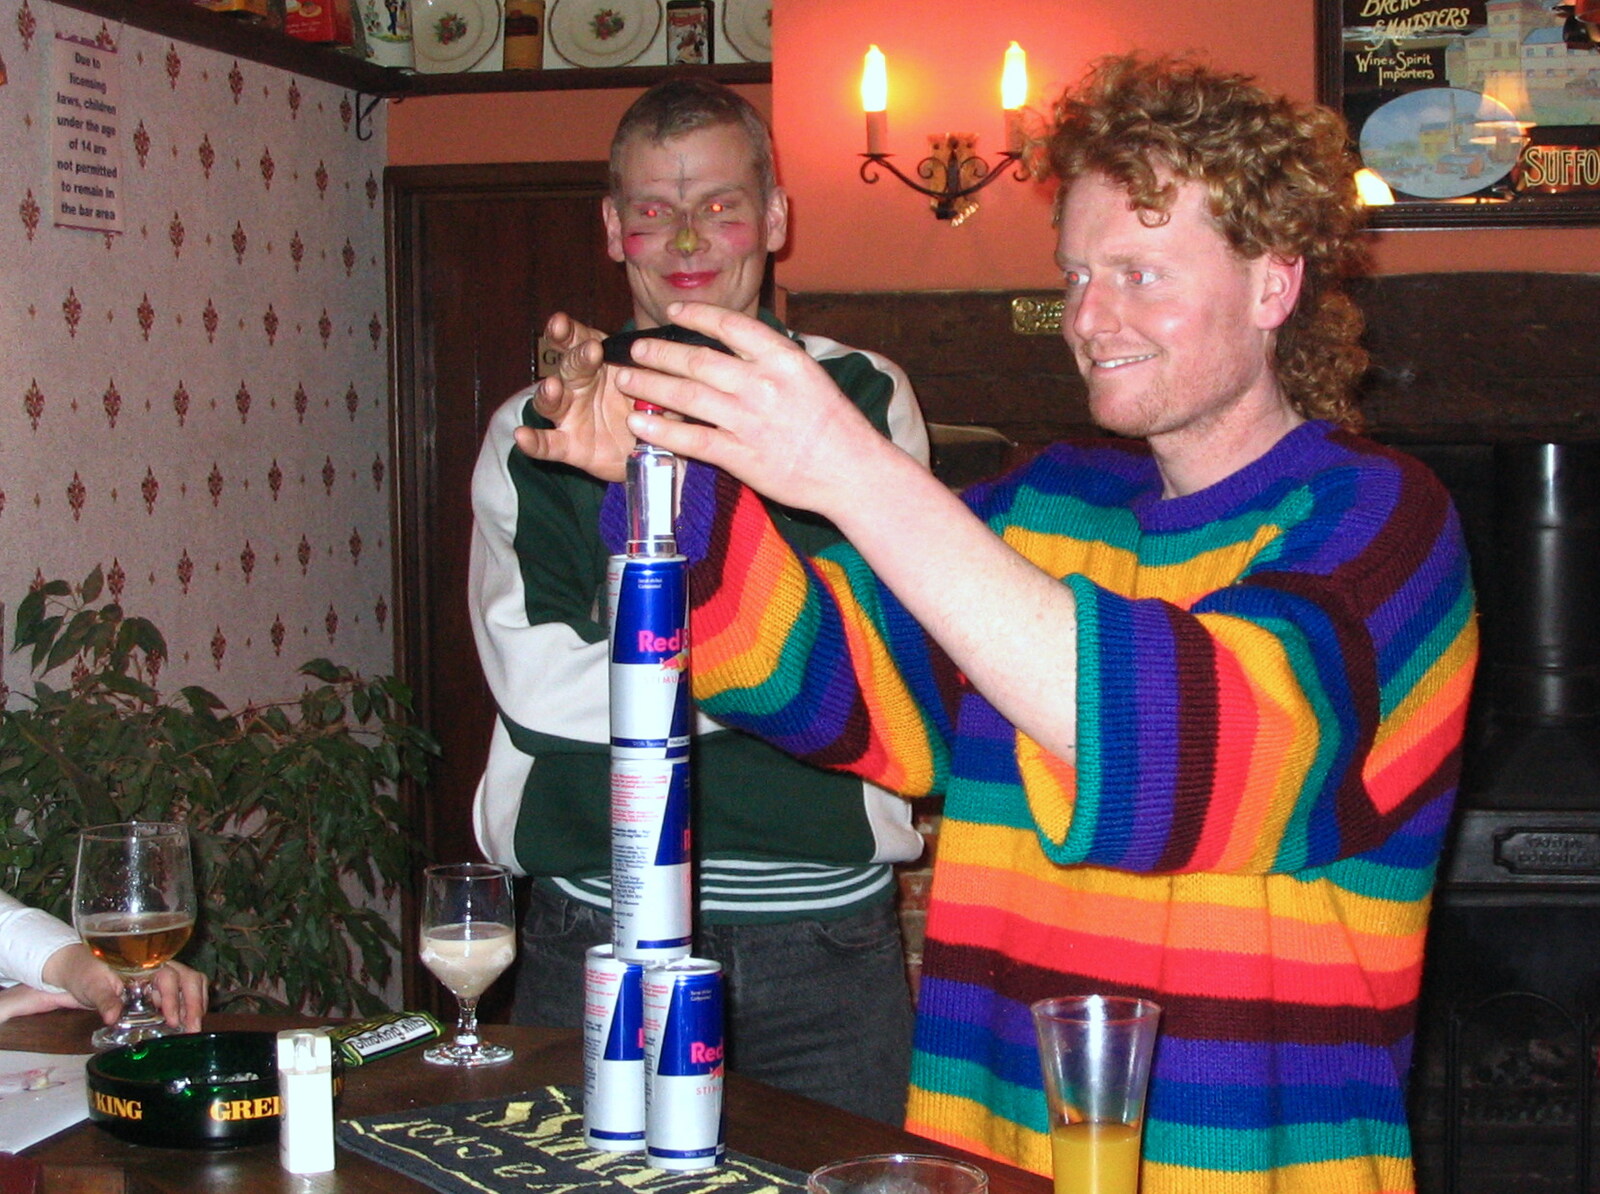 At the Swan, Wavy builds a Red Bull tower from Athlete and Doves at the UEA, Earlham Road, Norwich, Norfolk - 11th March 2005